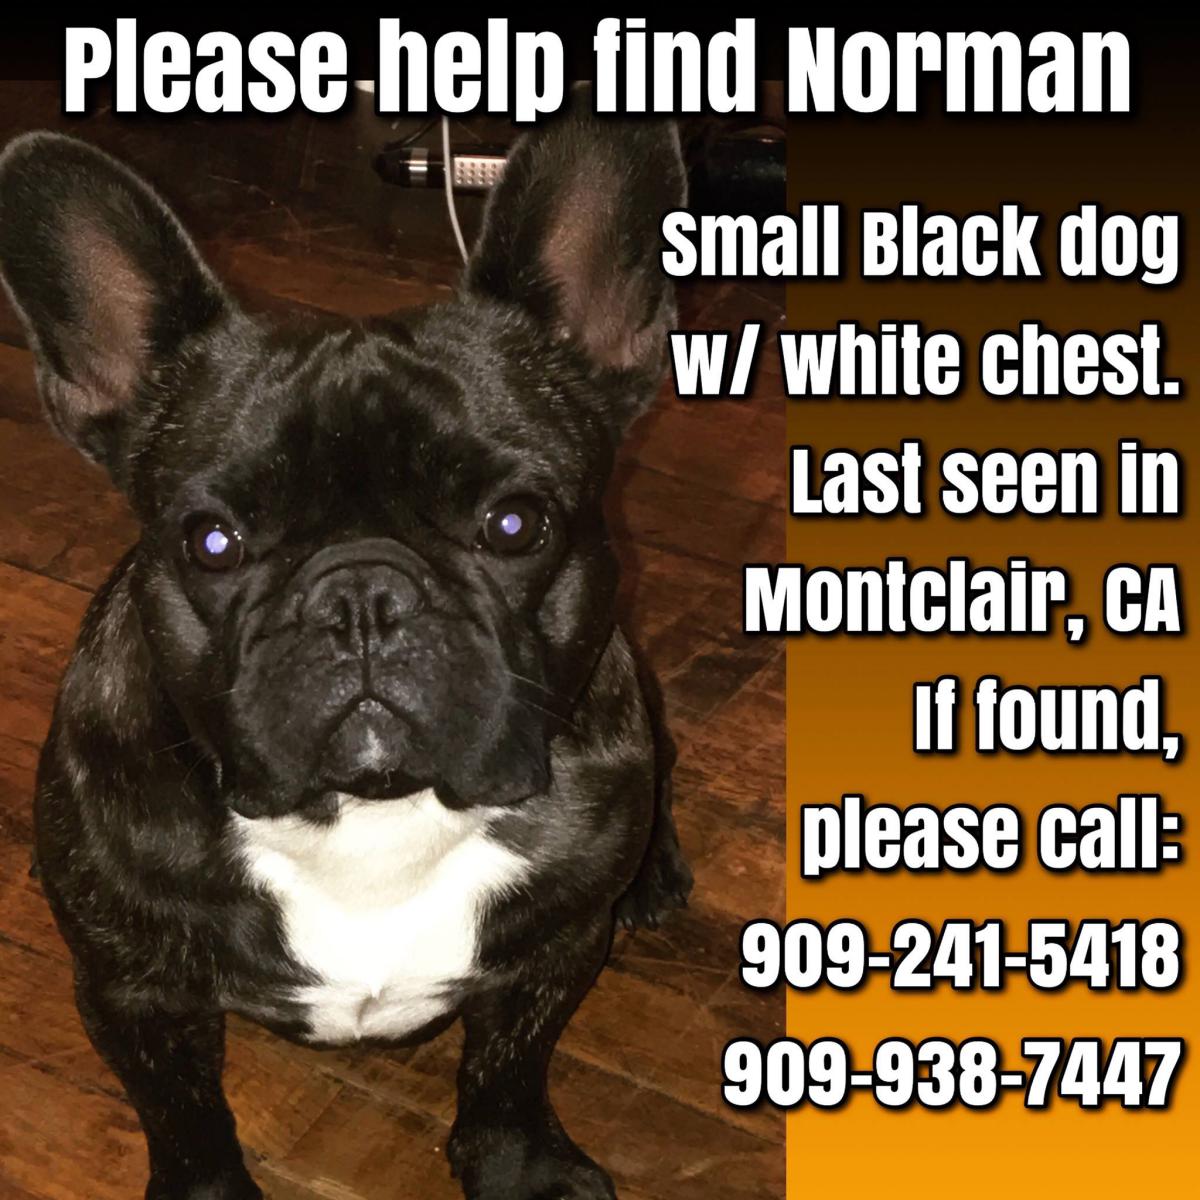 Image of Norman, Lost Dog